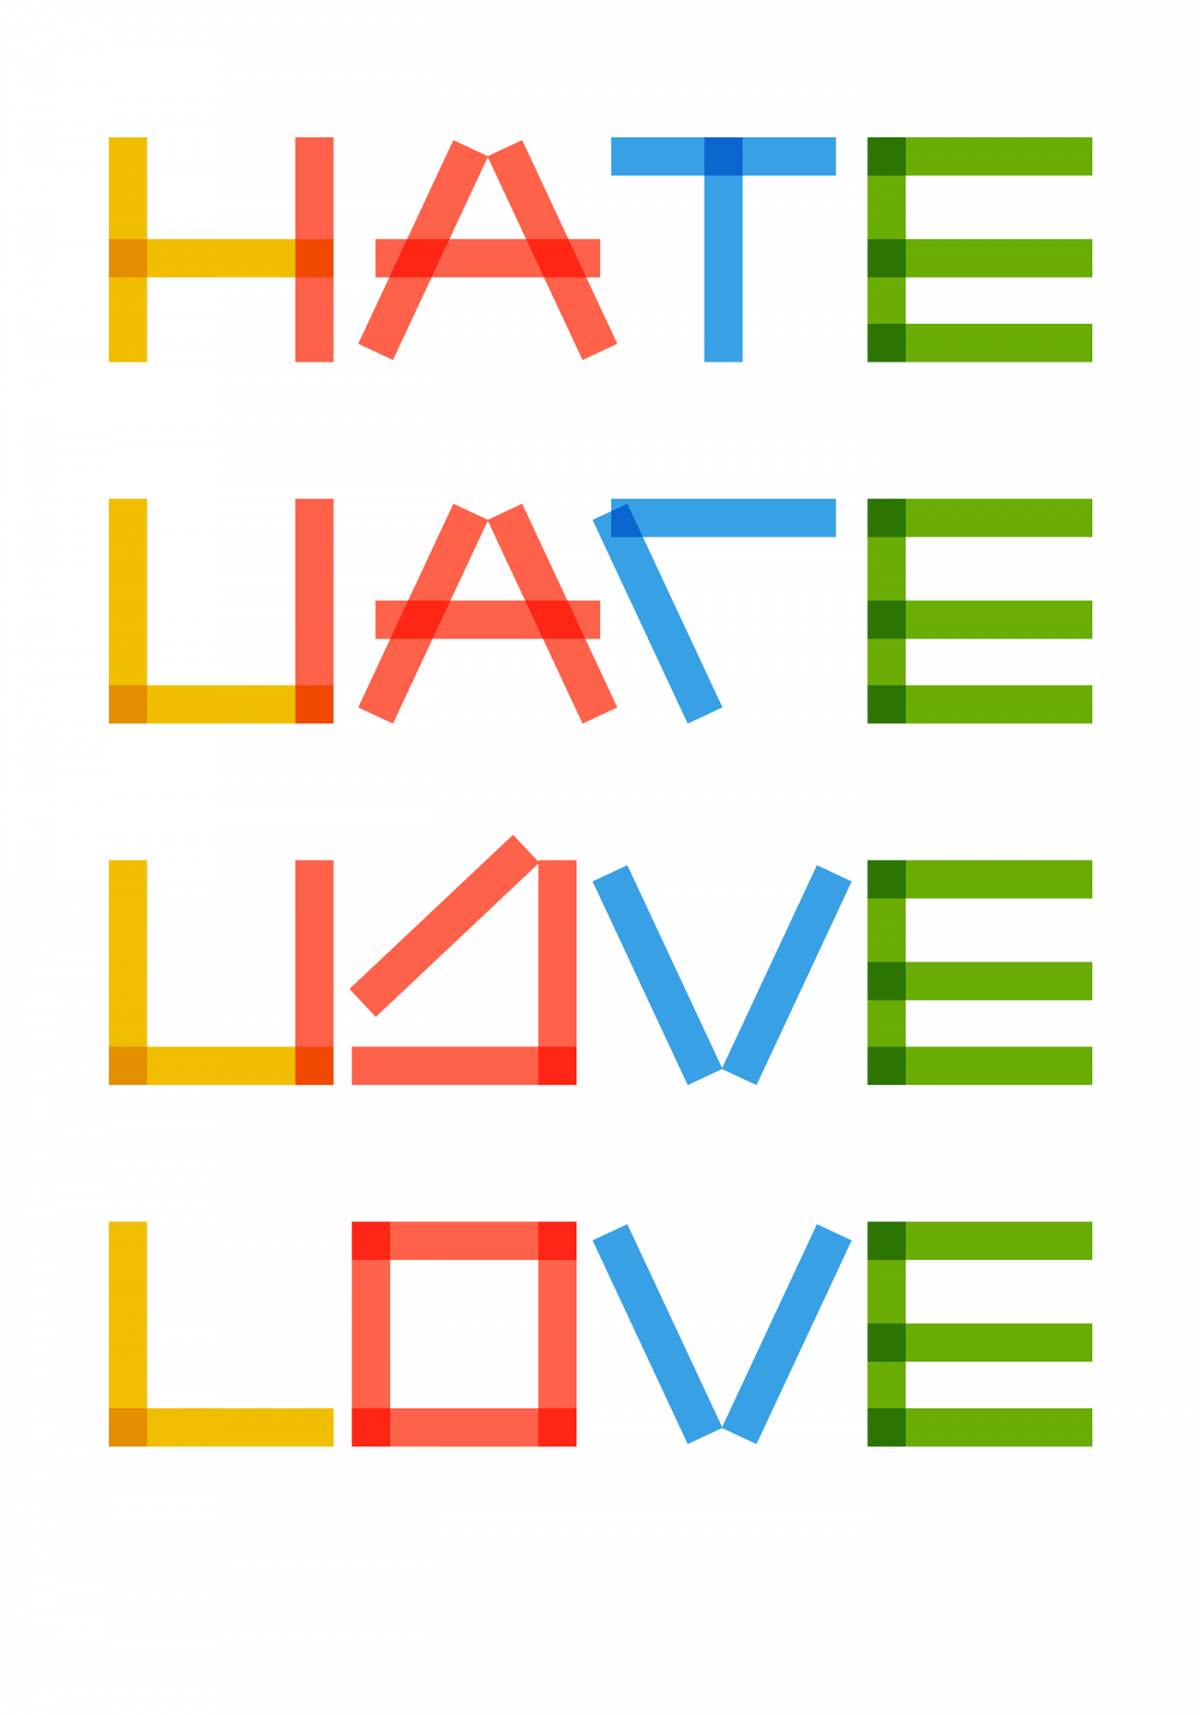 Going from hate and disgust to feeling good about yourself. From hate to love